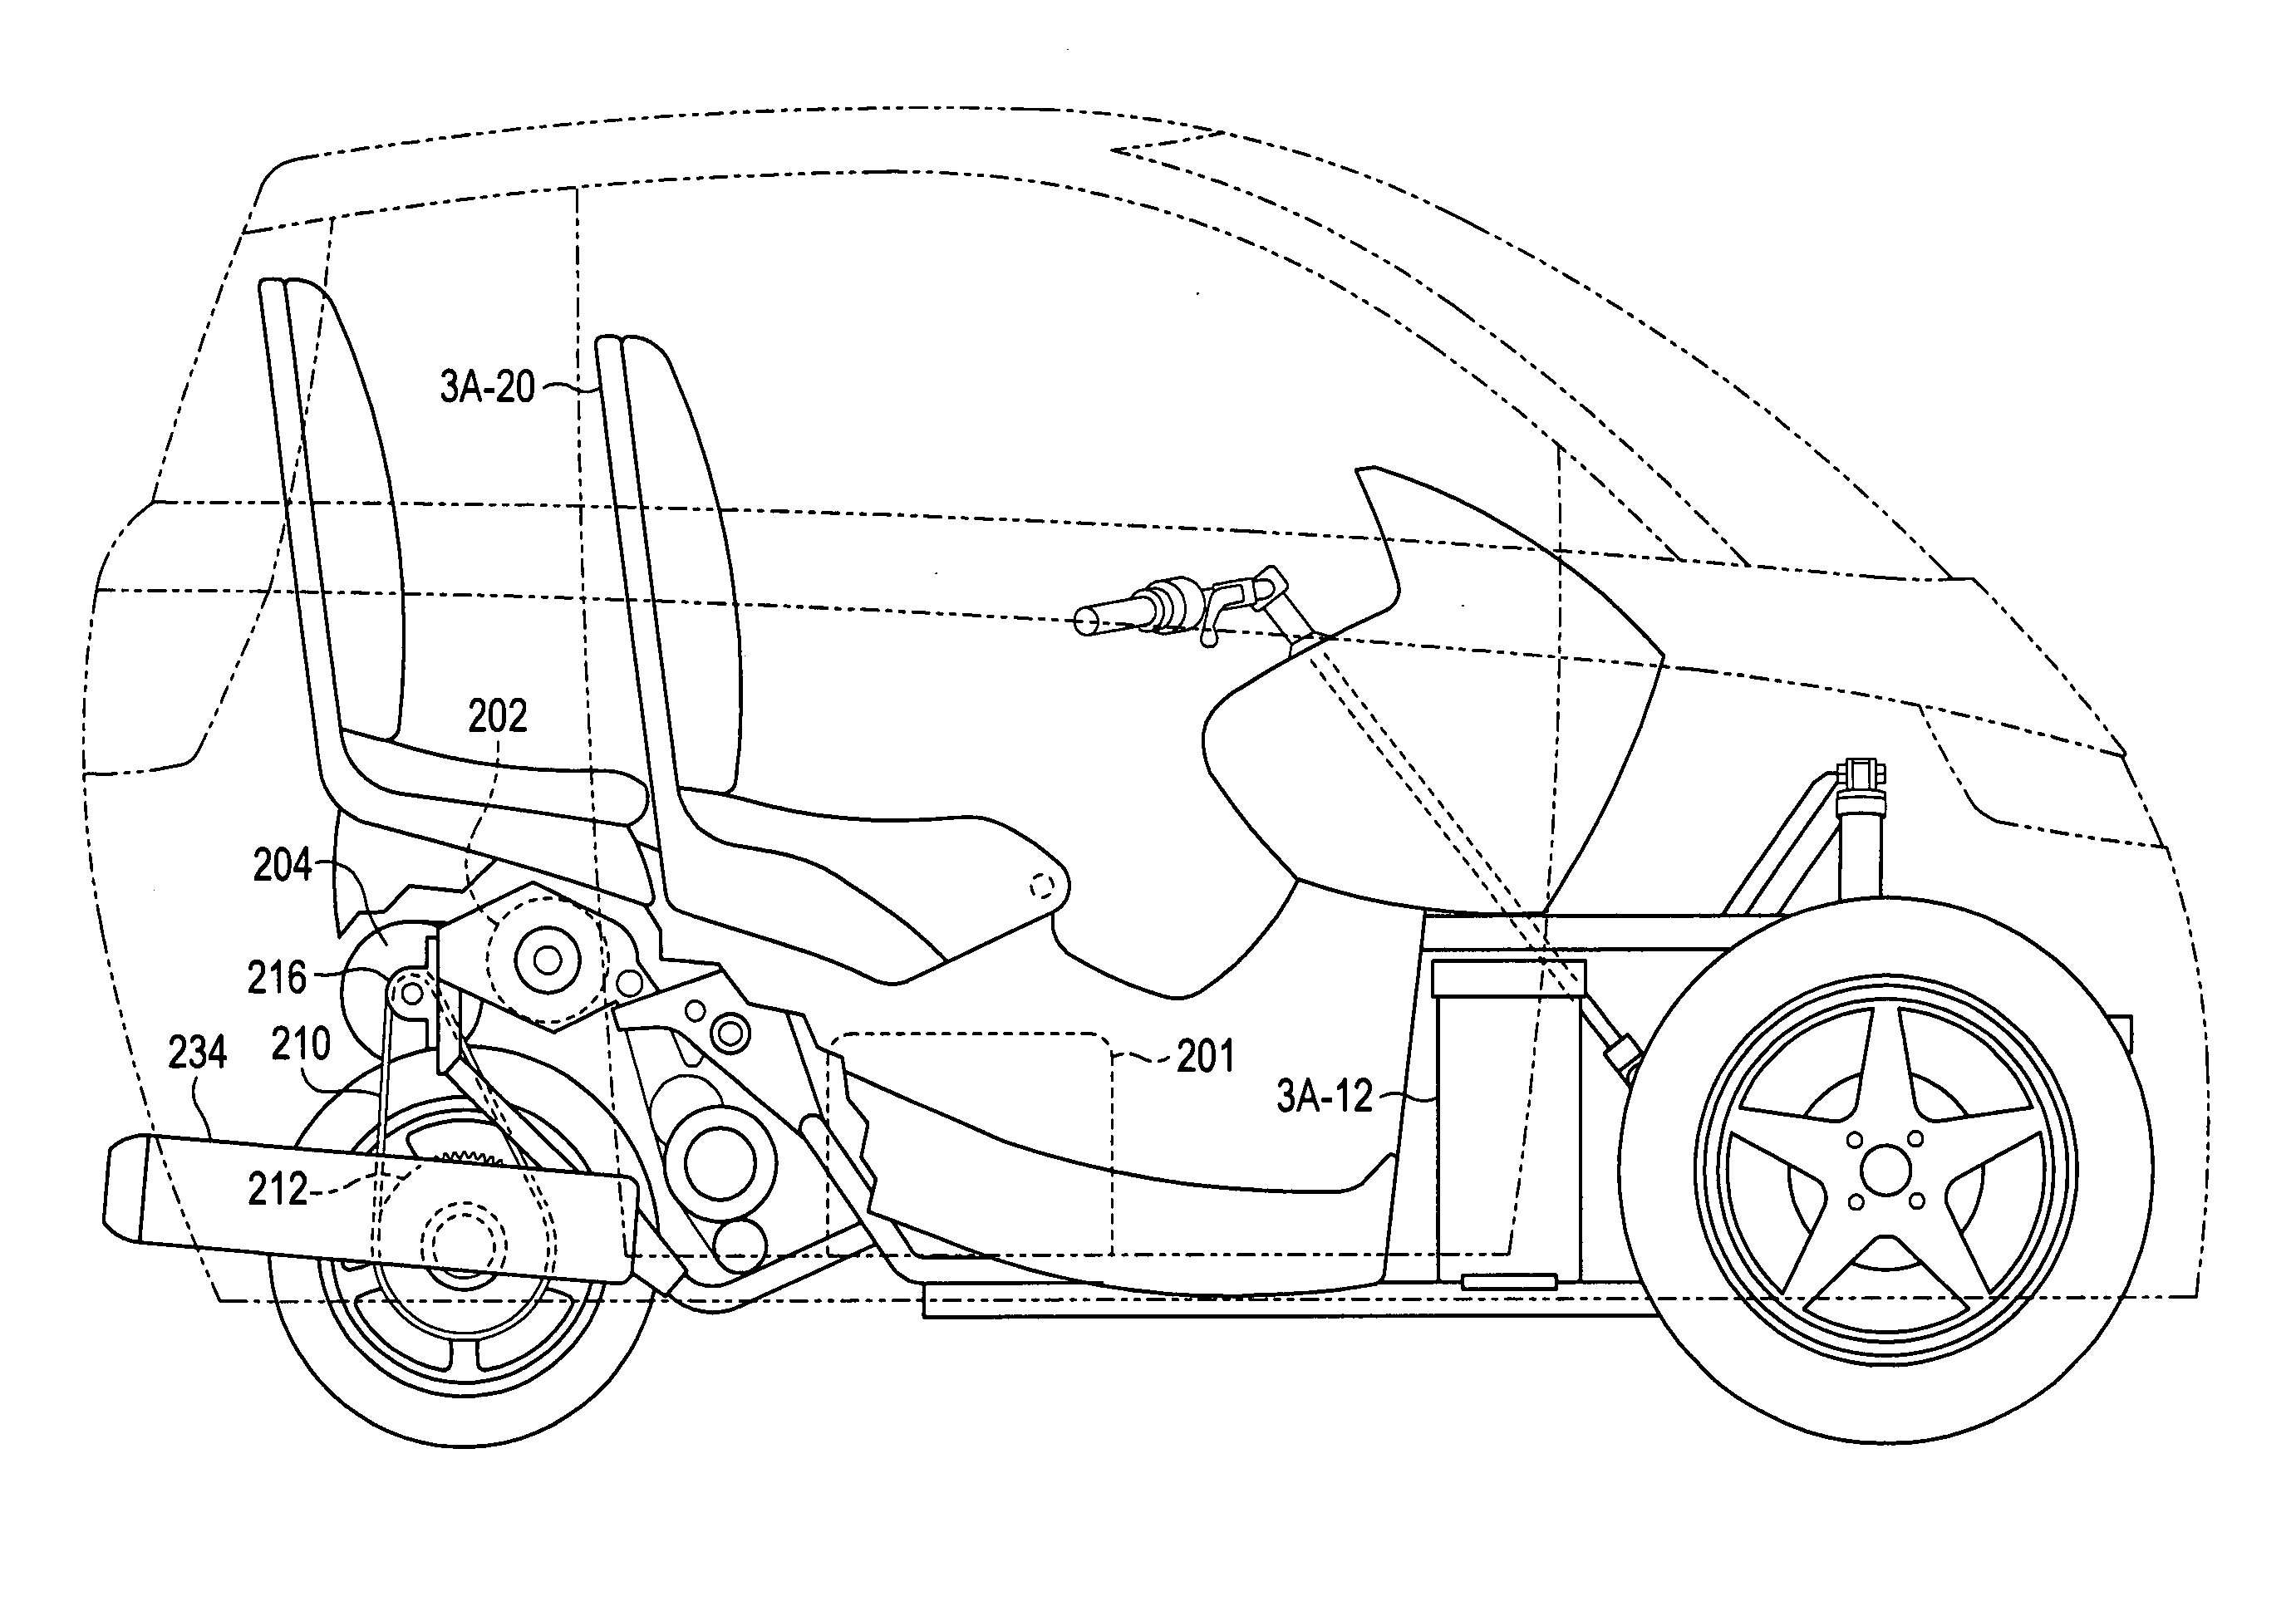 Free-to-lean three-wheeled passenger vehicle, power plant controller and body therefor